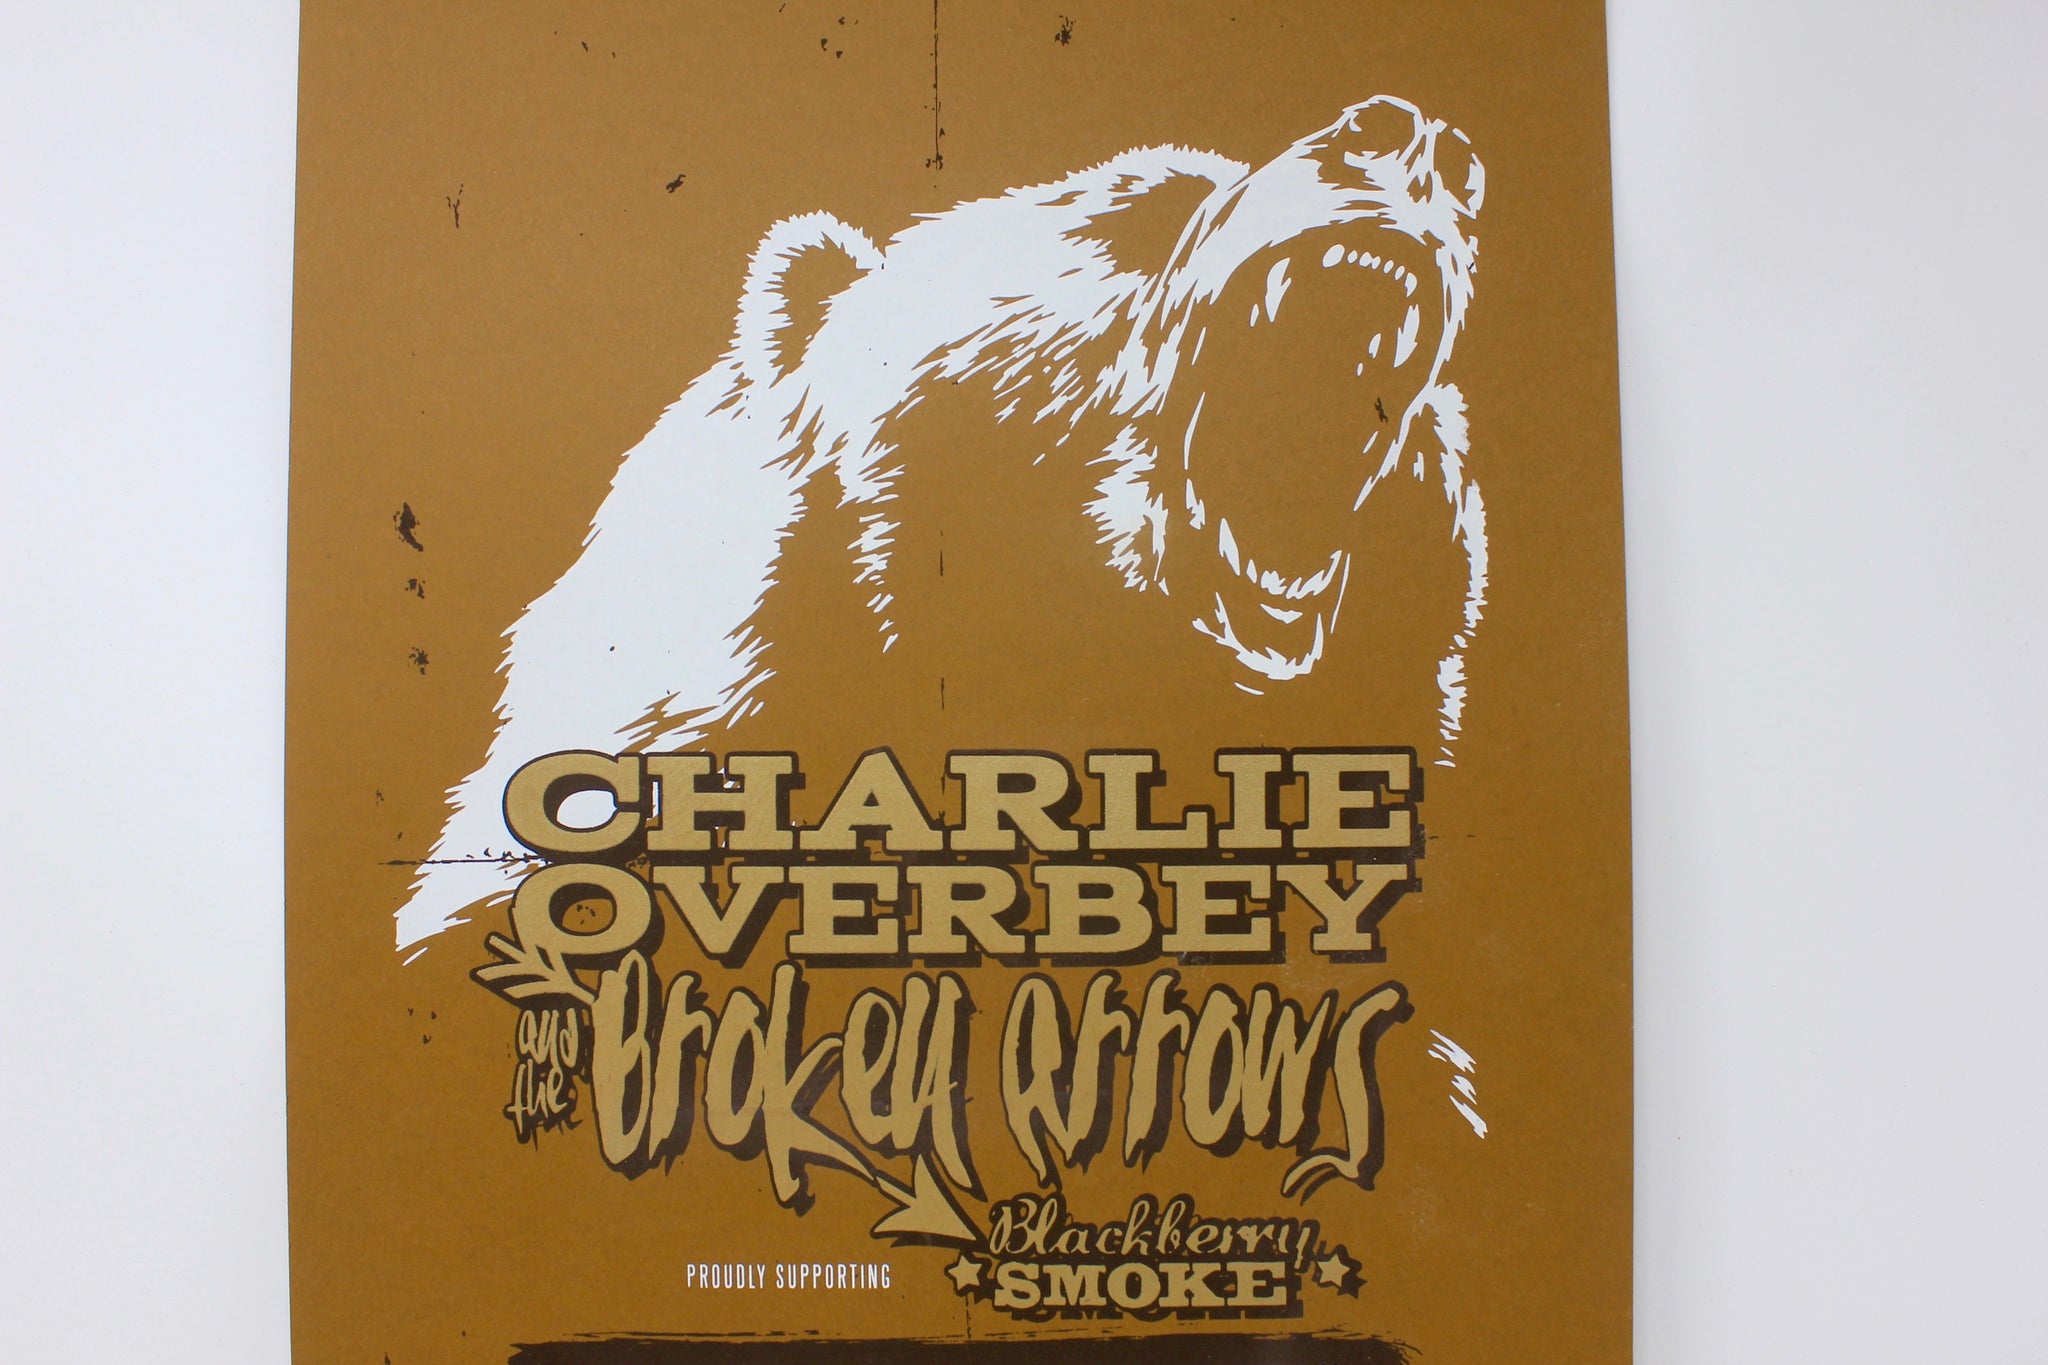 Blackberry Smoke / Charlie Overbey & The Broken Arrows 2015 Show Poster Limited Edition